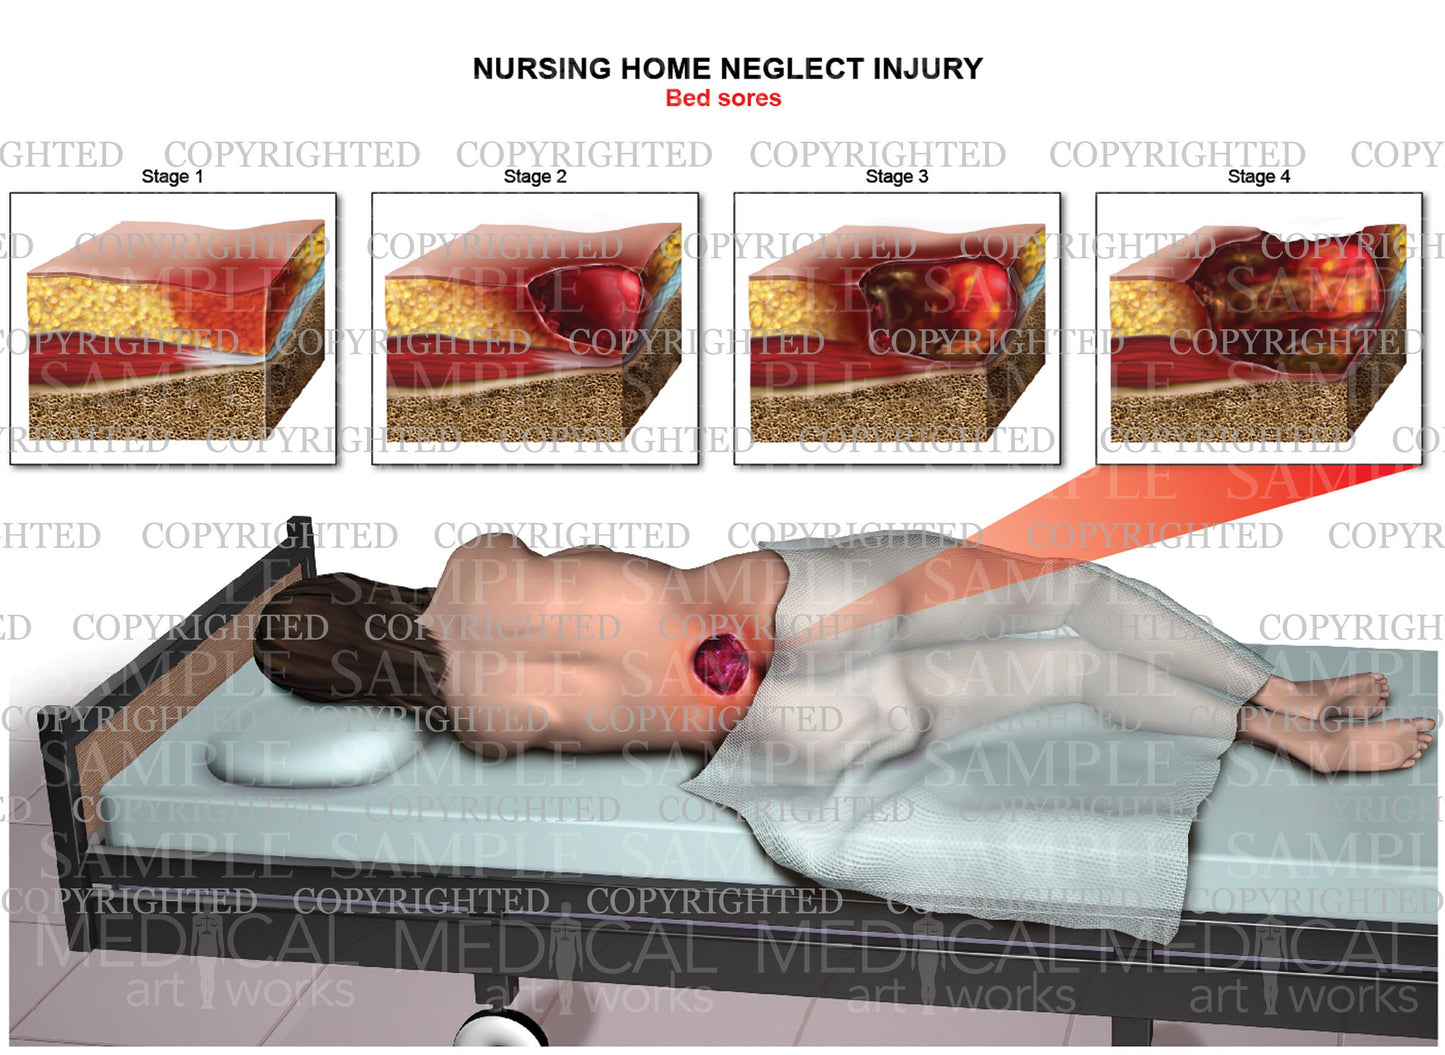 Nursing home neglect injury - Bed sores stages